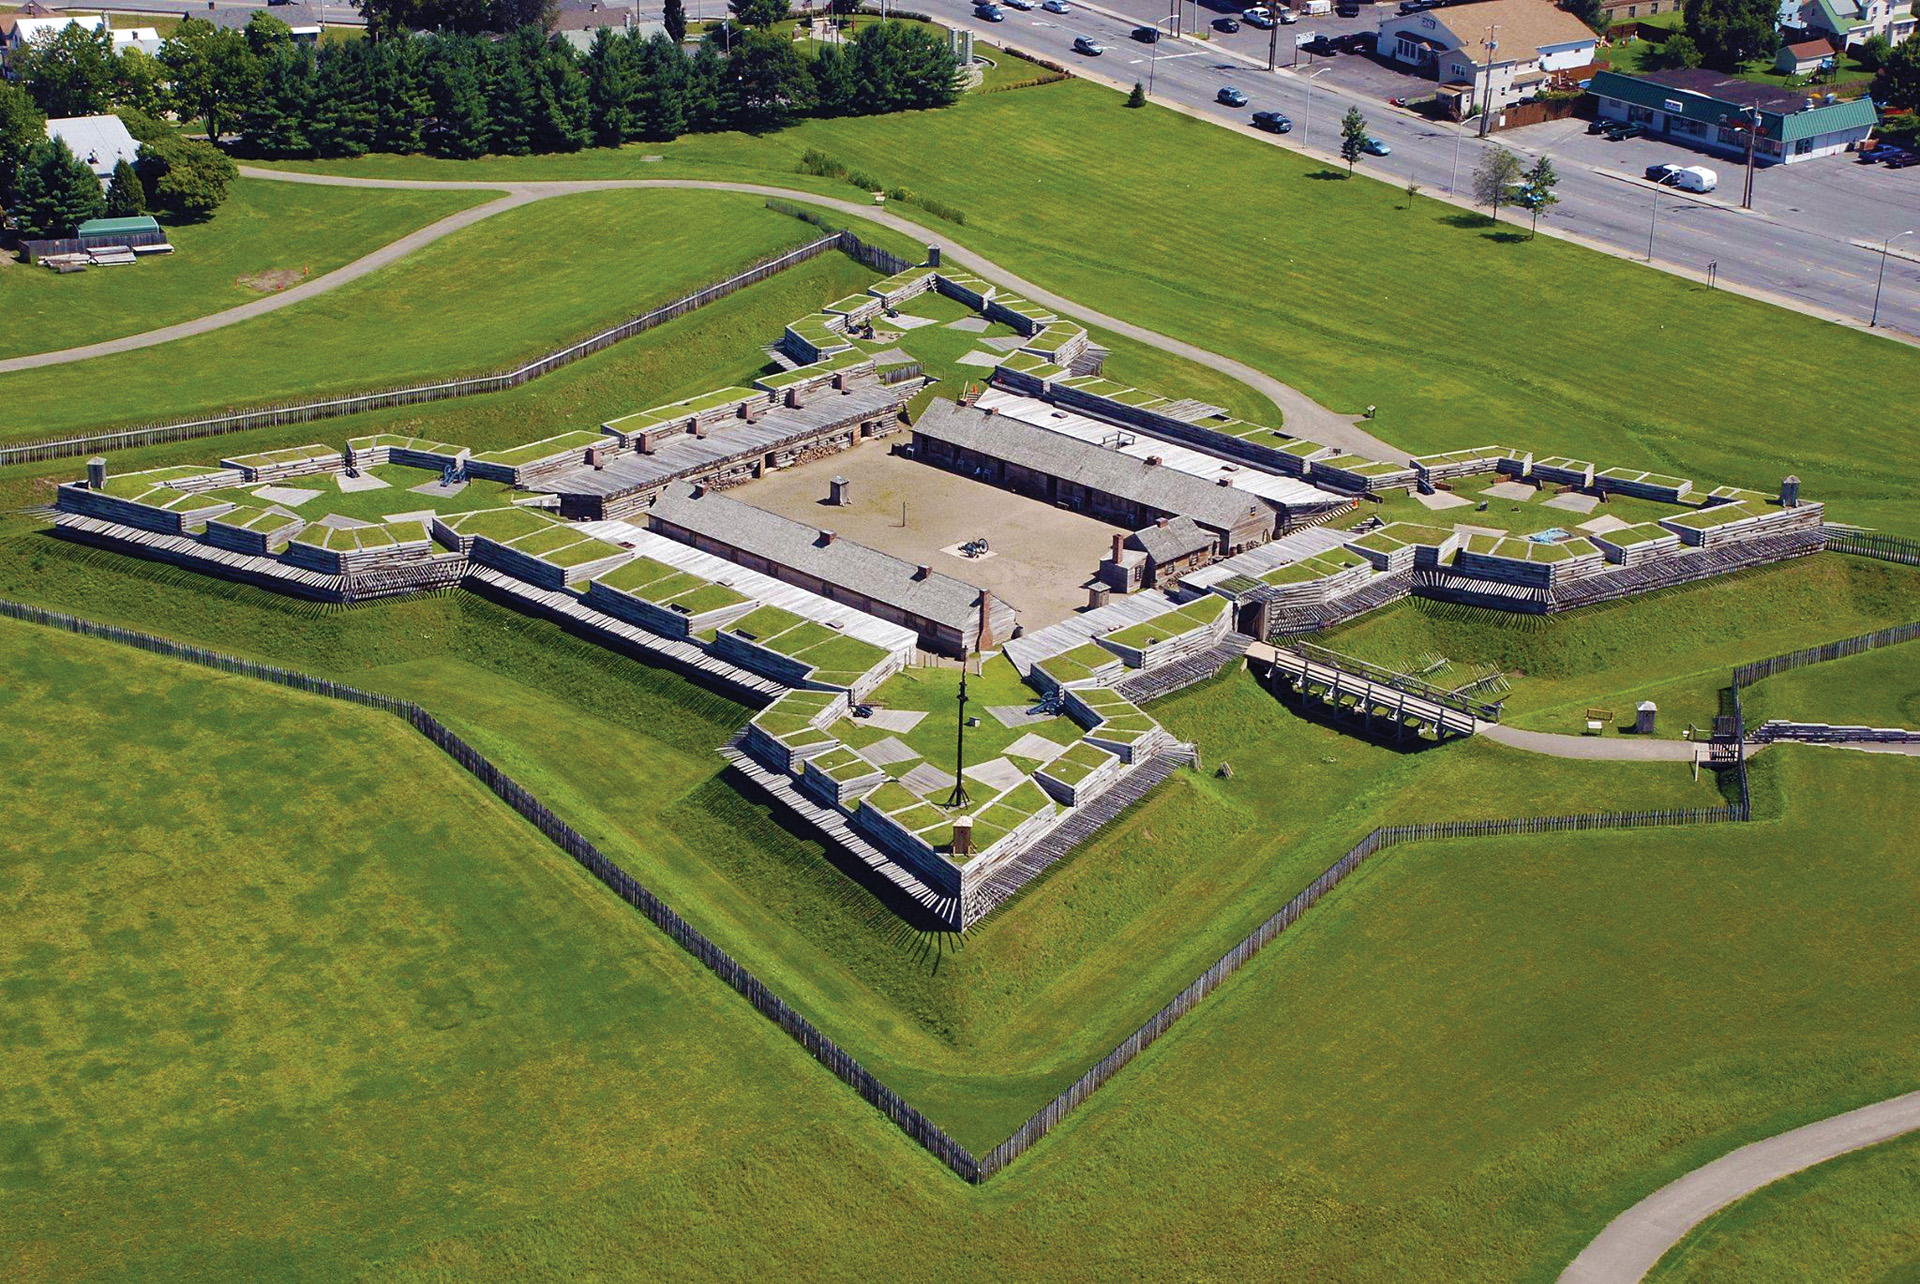 When the Patriots occupied French and Indian War-era Fort Stanwix in 1776 they had to overhaul its dilapidated defenses. The reconstruction of the fort shows its formidable bastions that provided interlocking fields of fire.  